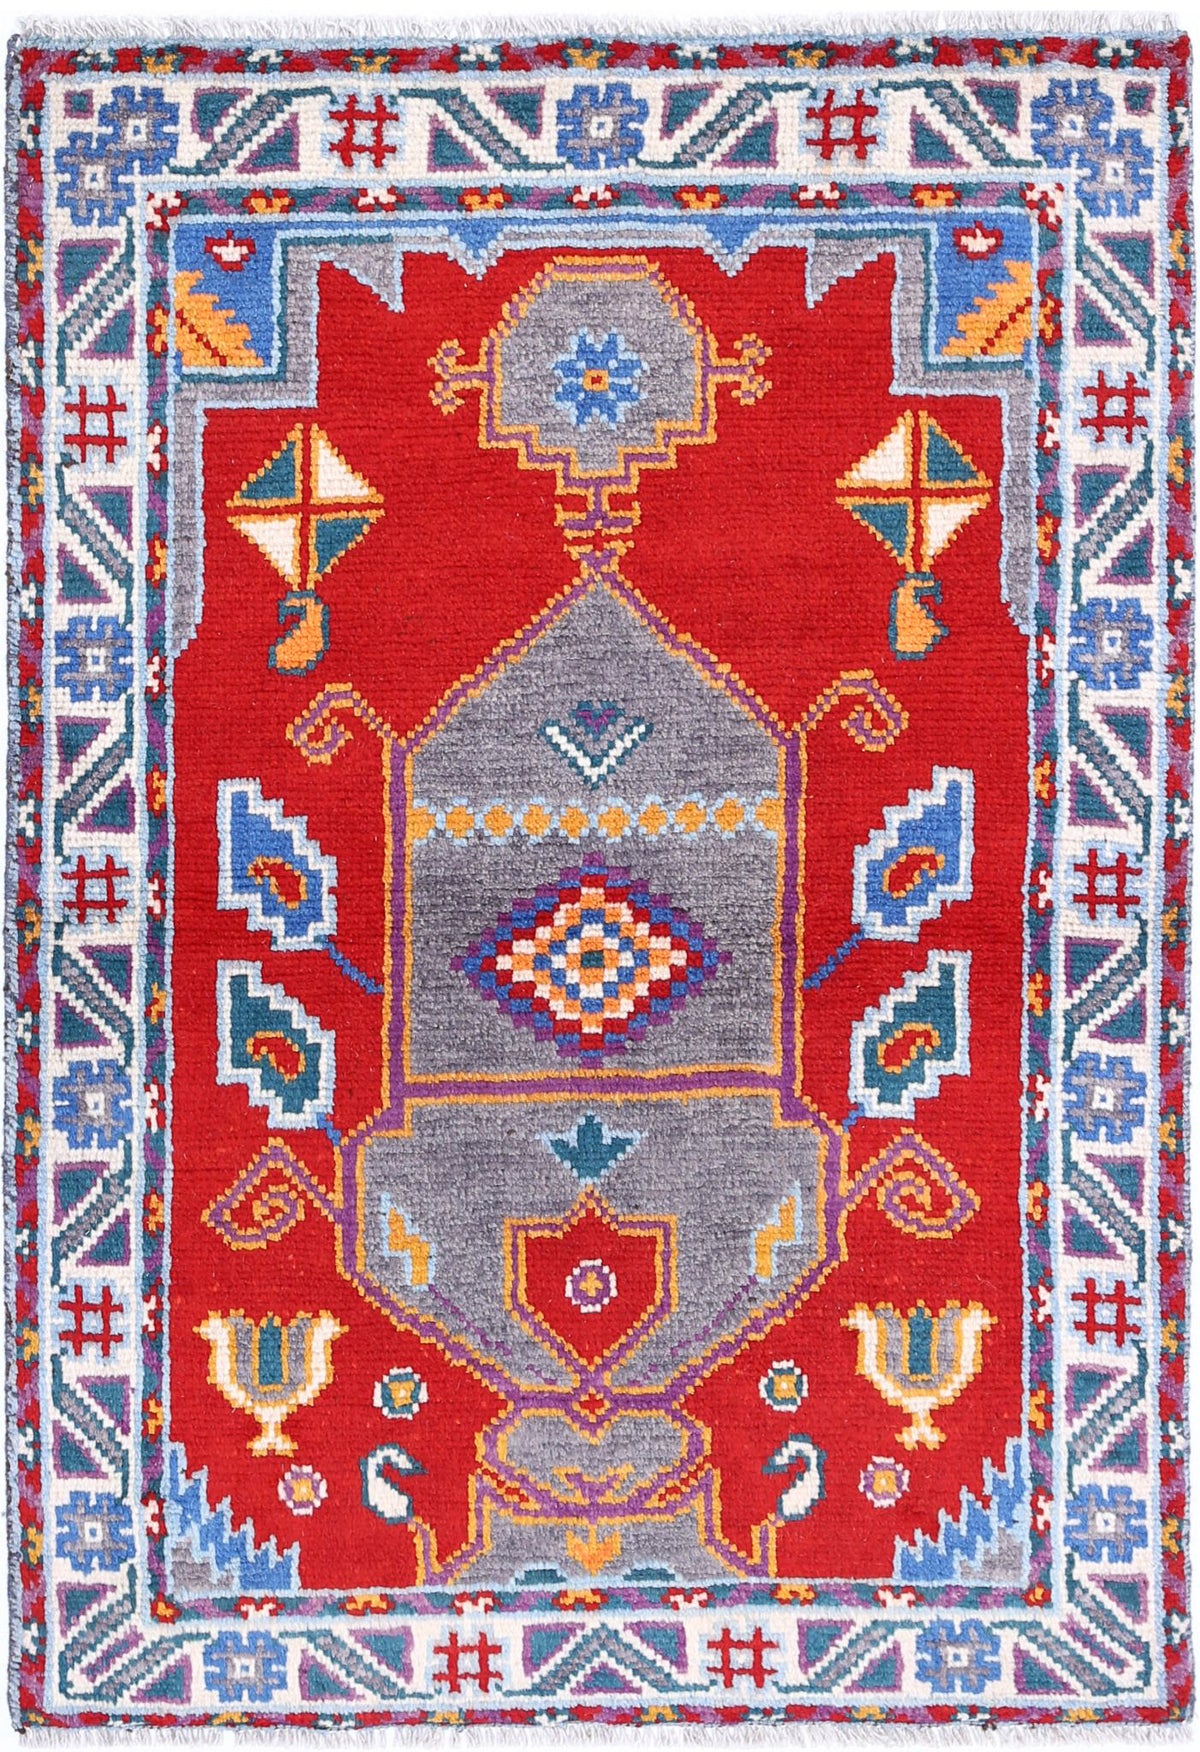 Revival-hand-knotted-qarghani-wool-rug-5014014.jpg